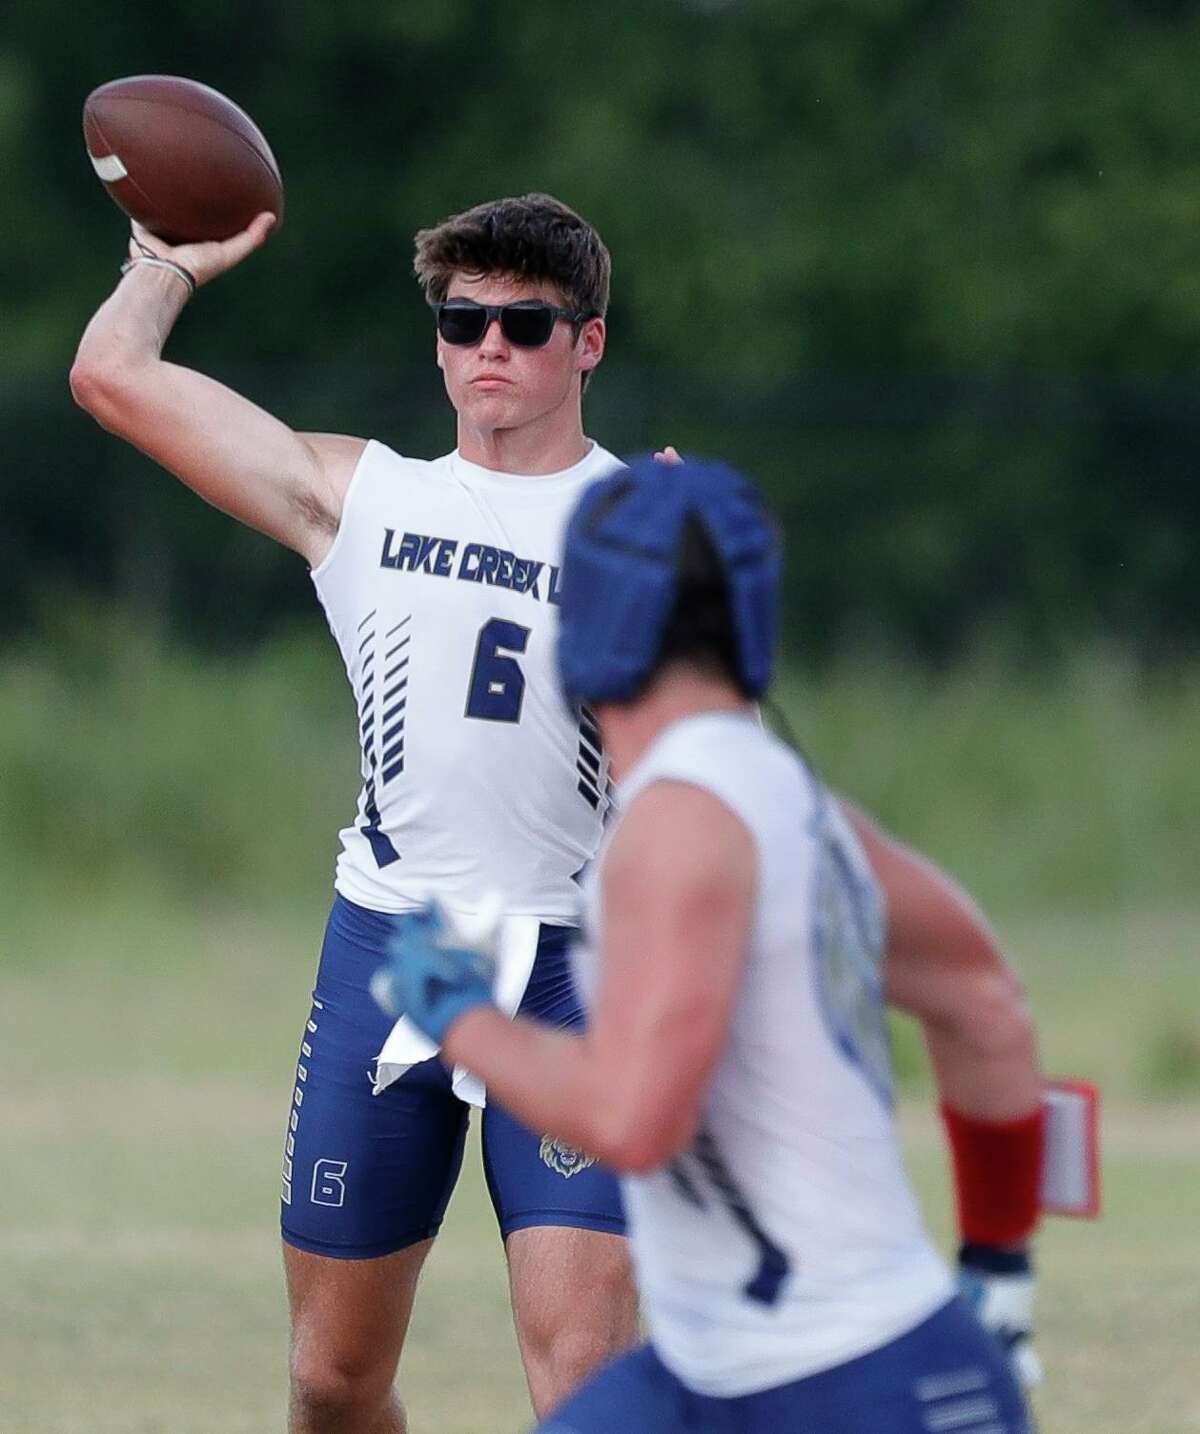 Lake Creek quarterback Eli Morcos throws a pass during a high school state 7on-7 tournament at Grand Oak High School, Friday, June 17, 2022, in Spring.